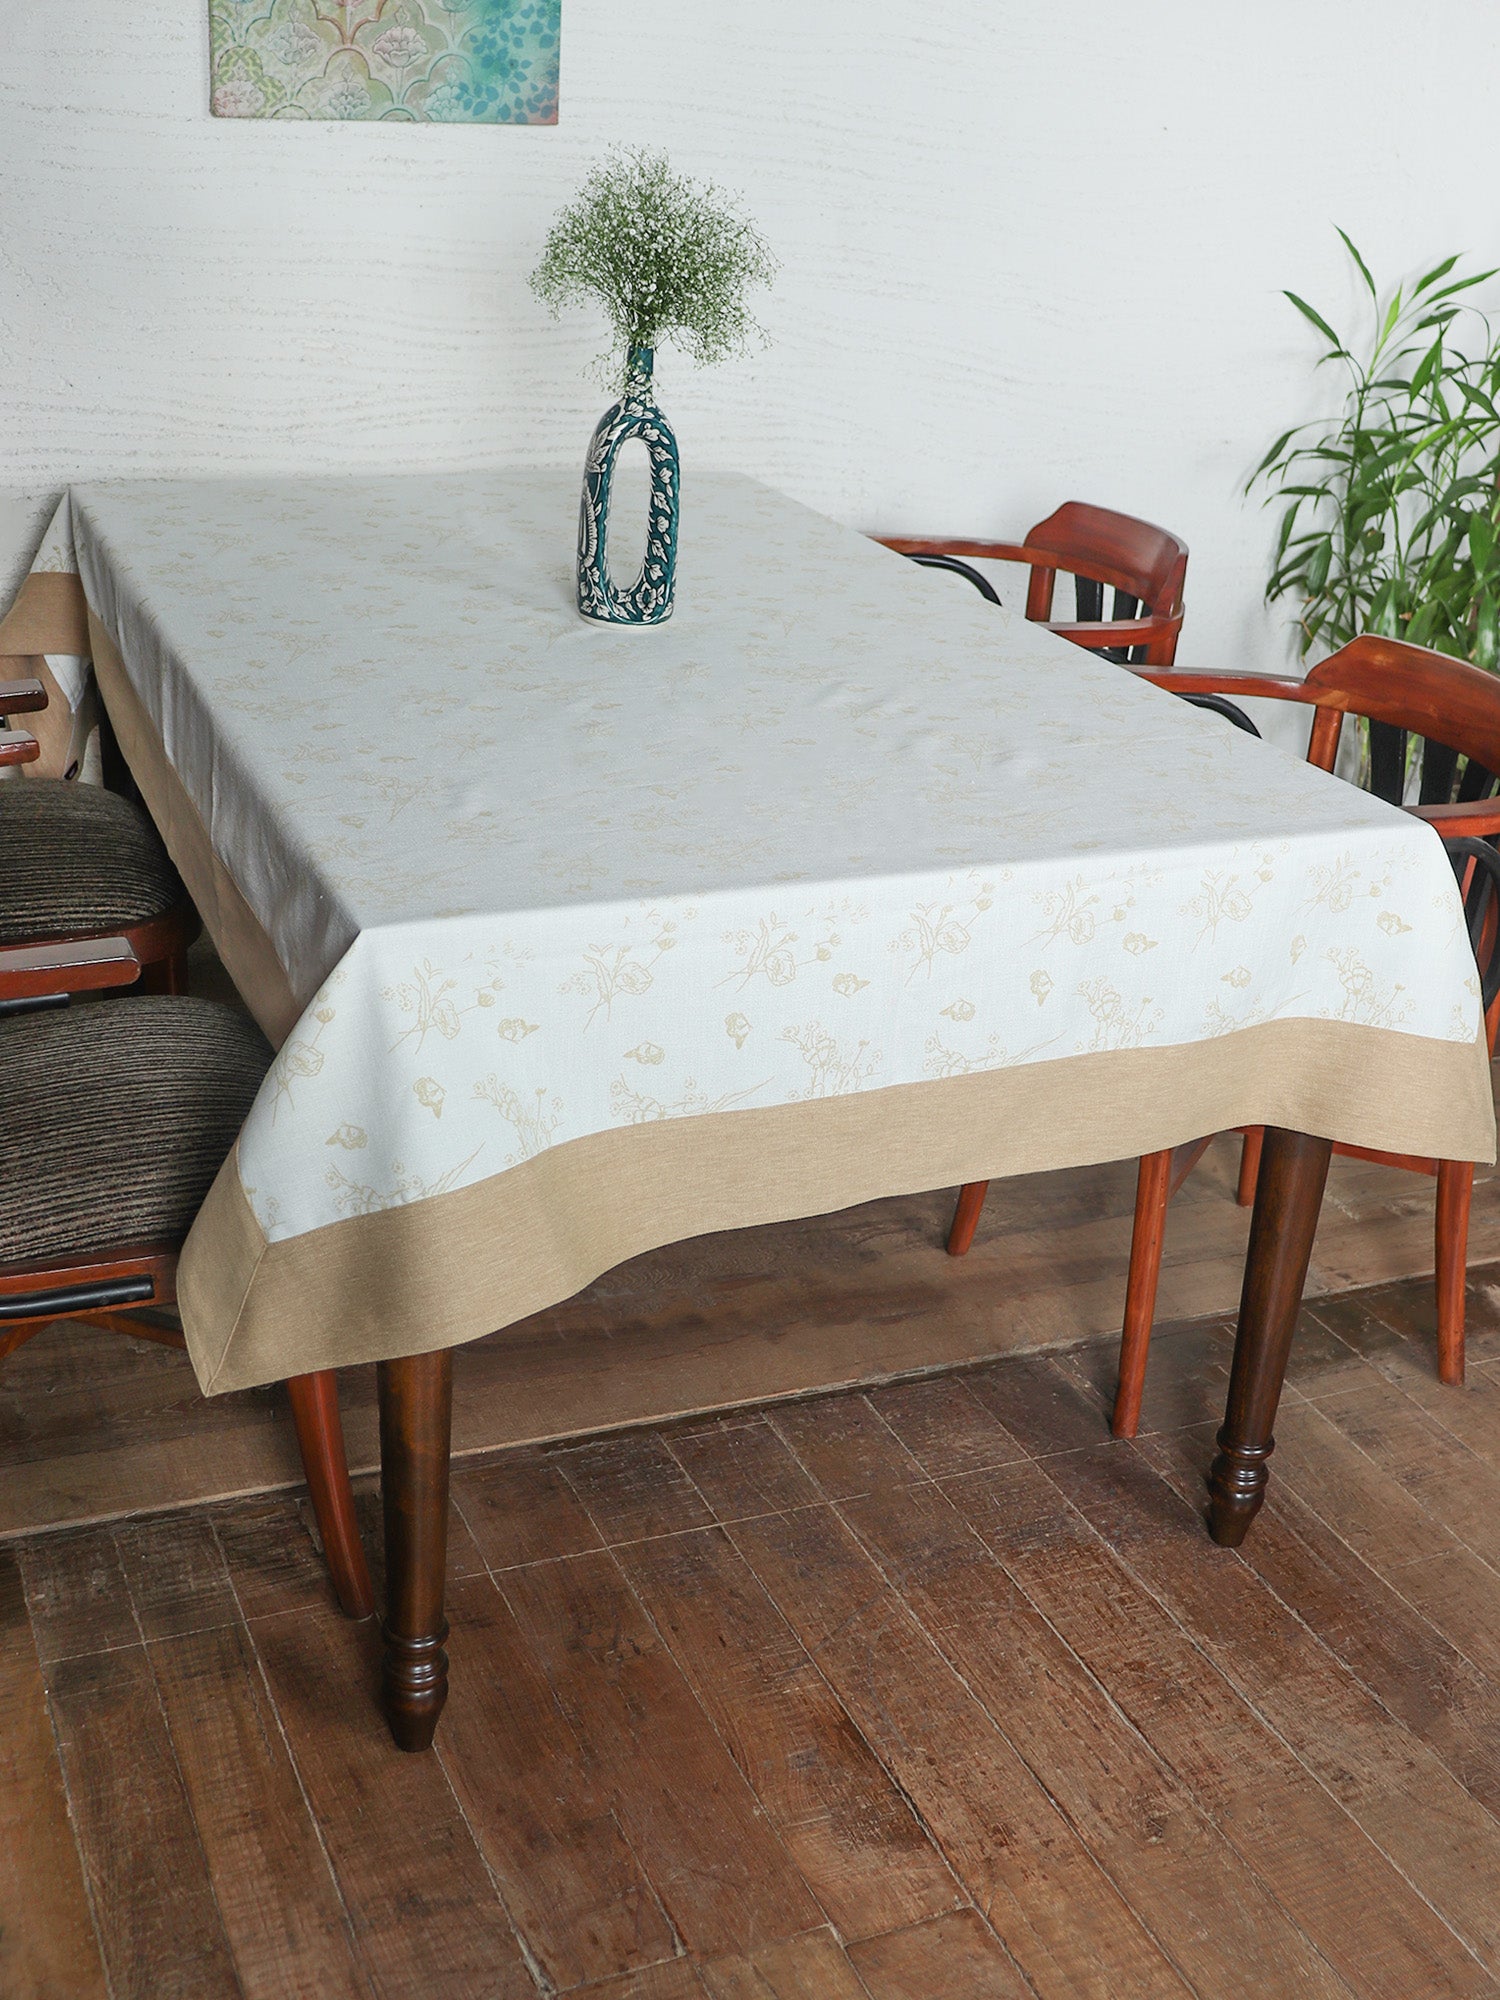 Table Cover with Panel Border and  Self Textured Floral Pattern | Cotton Blend - Offwhite and Gold | Heat Resistant Kitchen Table/Dining Table Cloth, 52 X 84 Inches; 130 cm X 210 cm